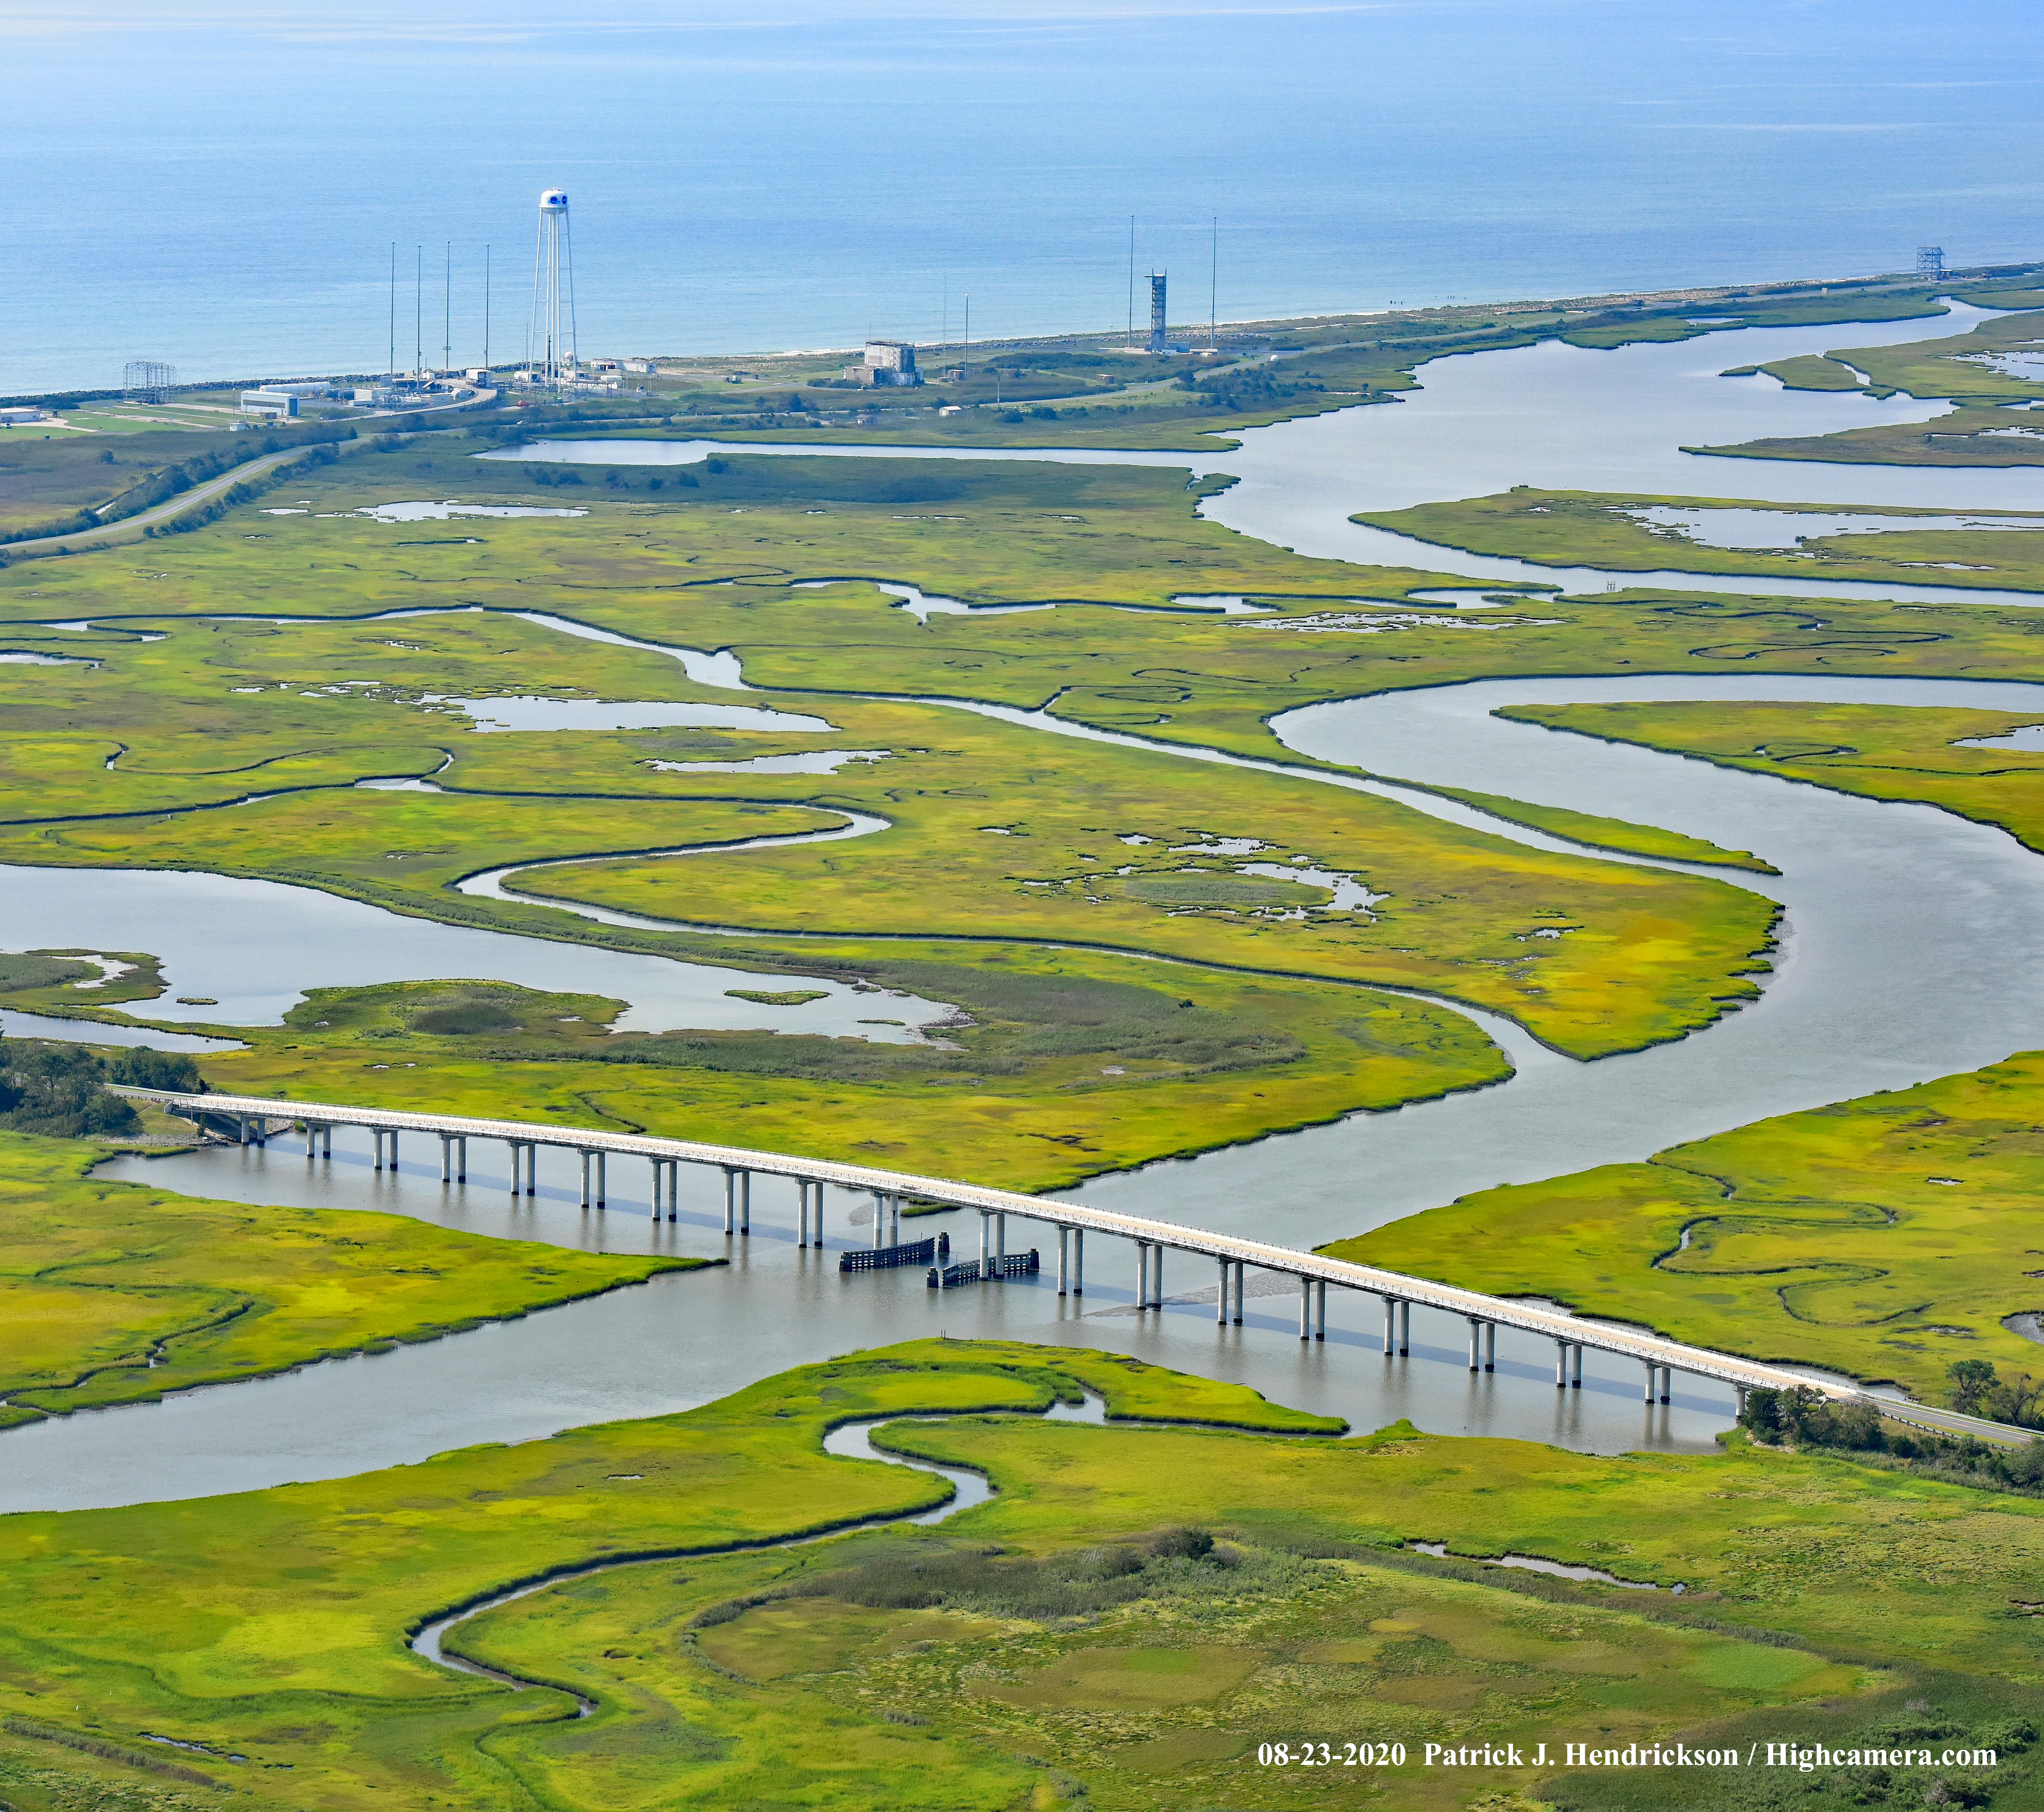 View from south to north of the NASA Wallops Flight Facility causeway and bridge over Cat Creek that runs through wetlands between the Mainland and Wallops Island.